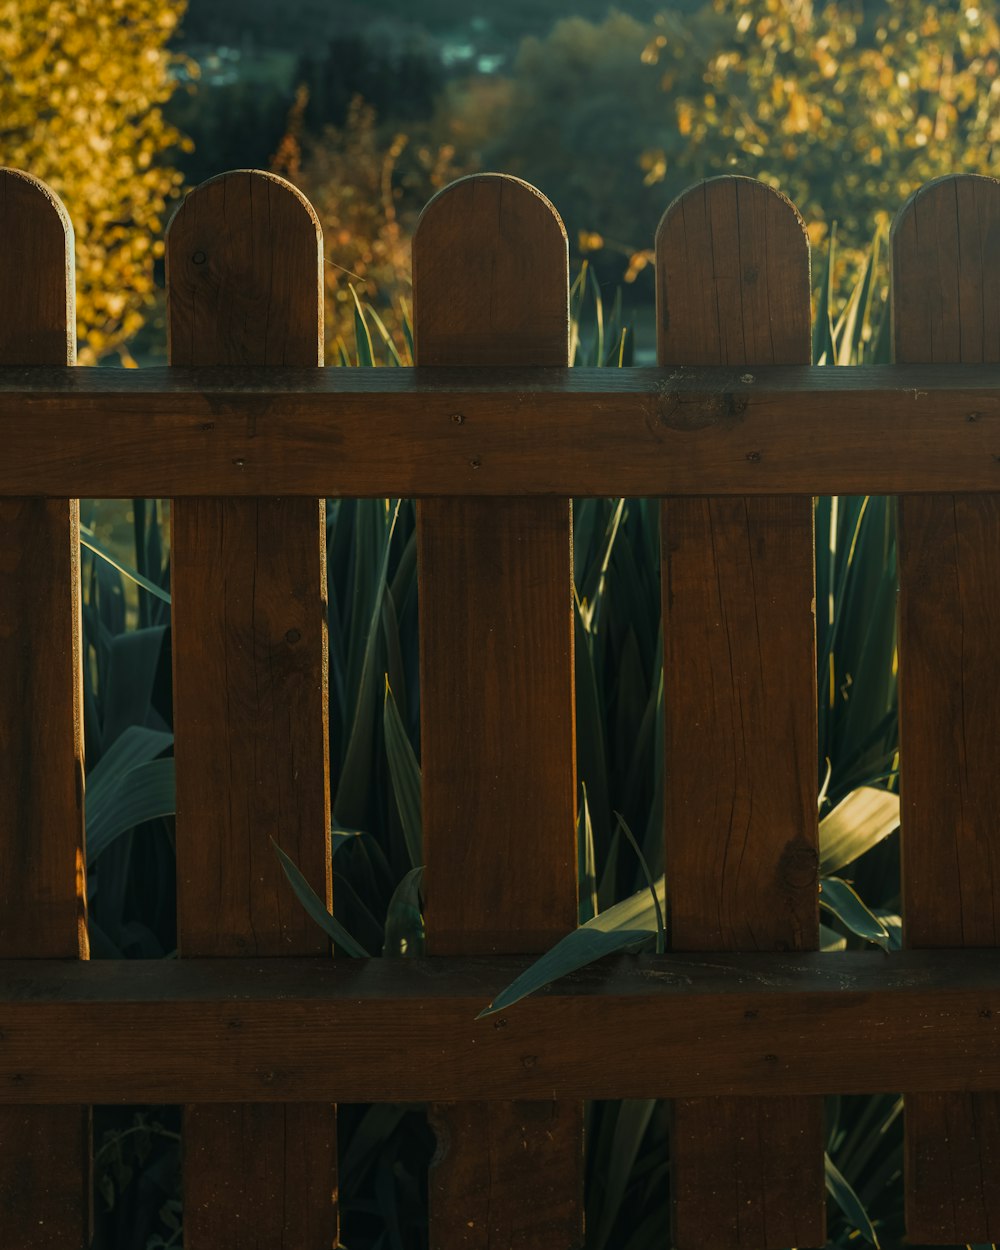 a close up of a wooden fence with plants in the background